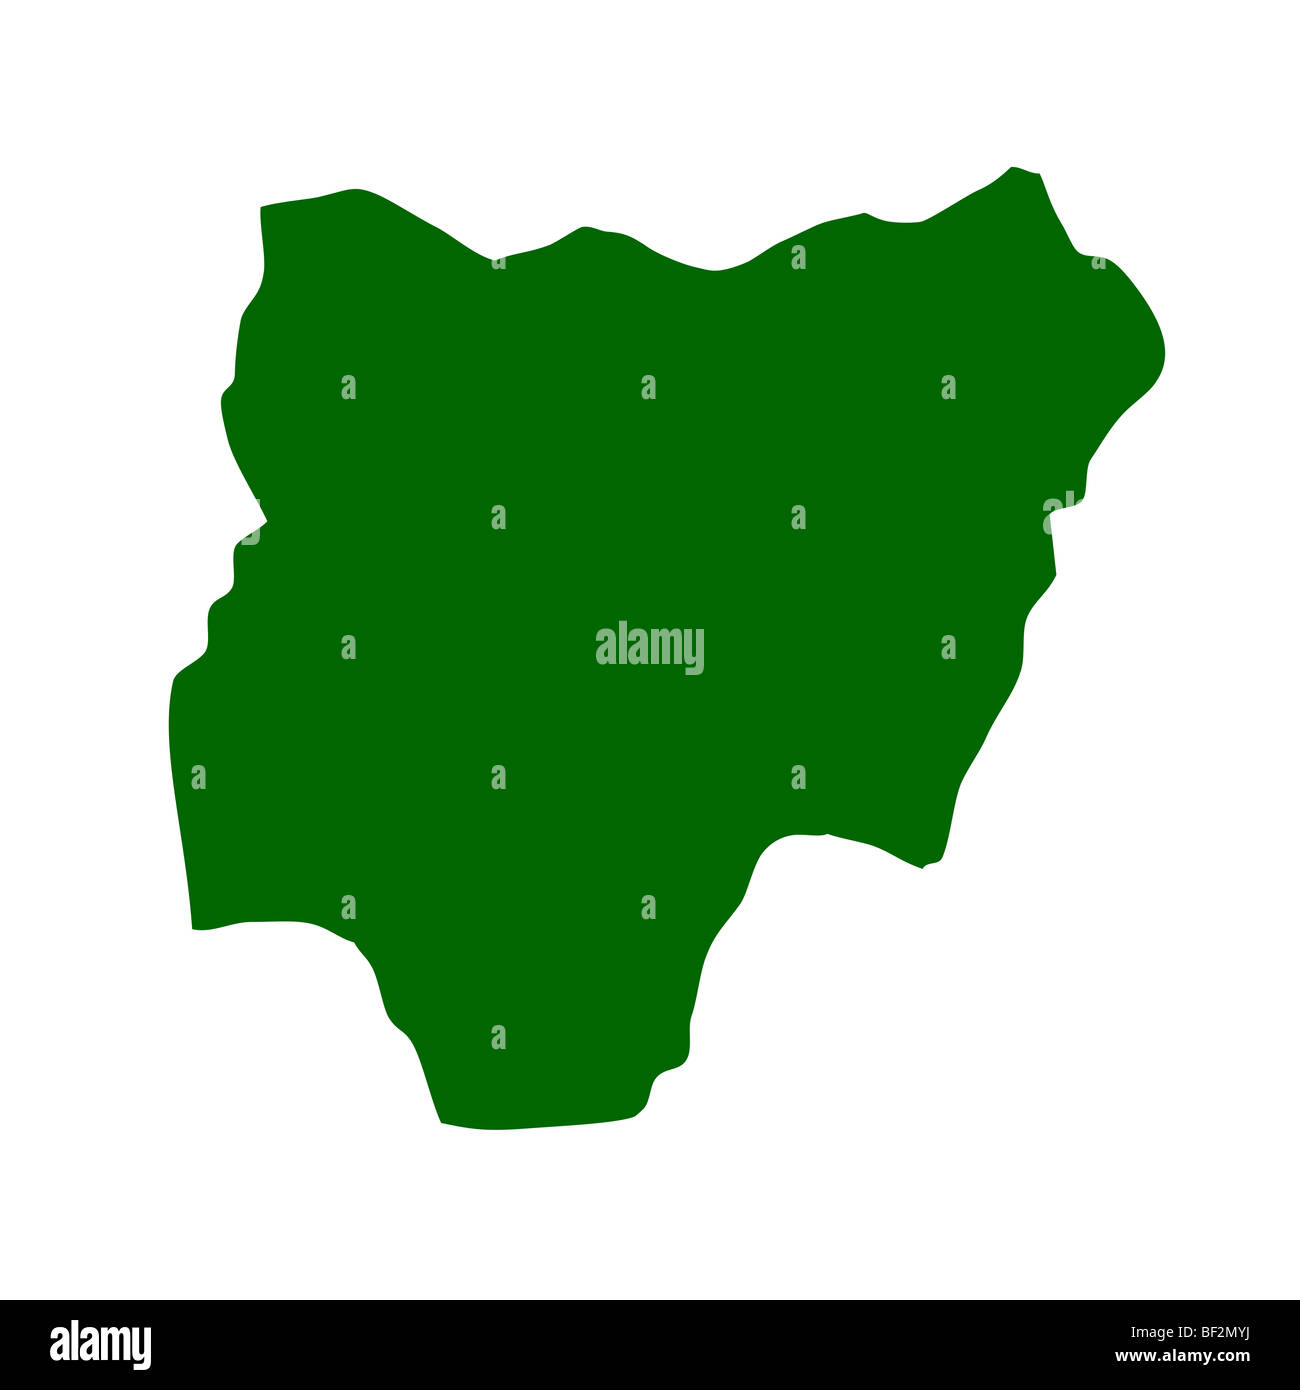 Outline map of Nigeria isolated on white background with clipping path. Stock Photo